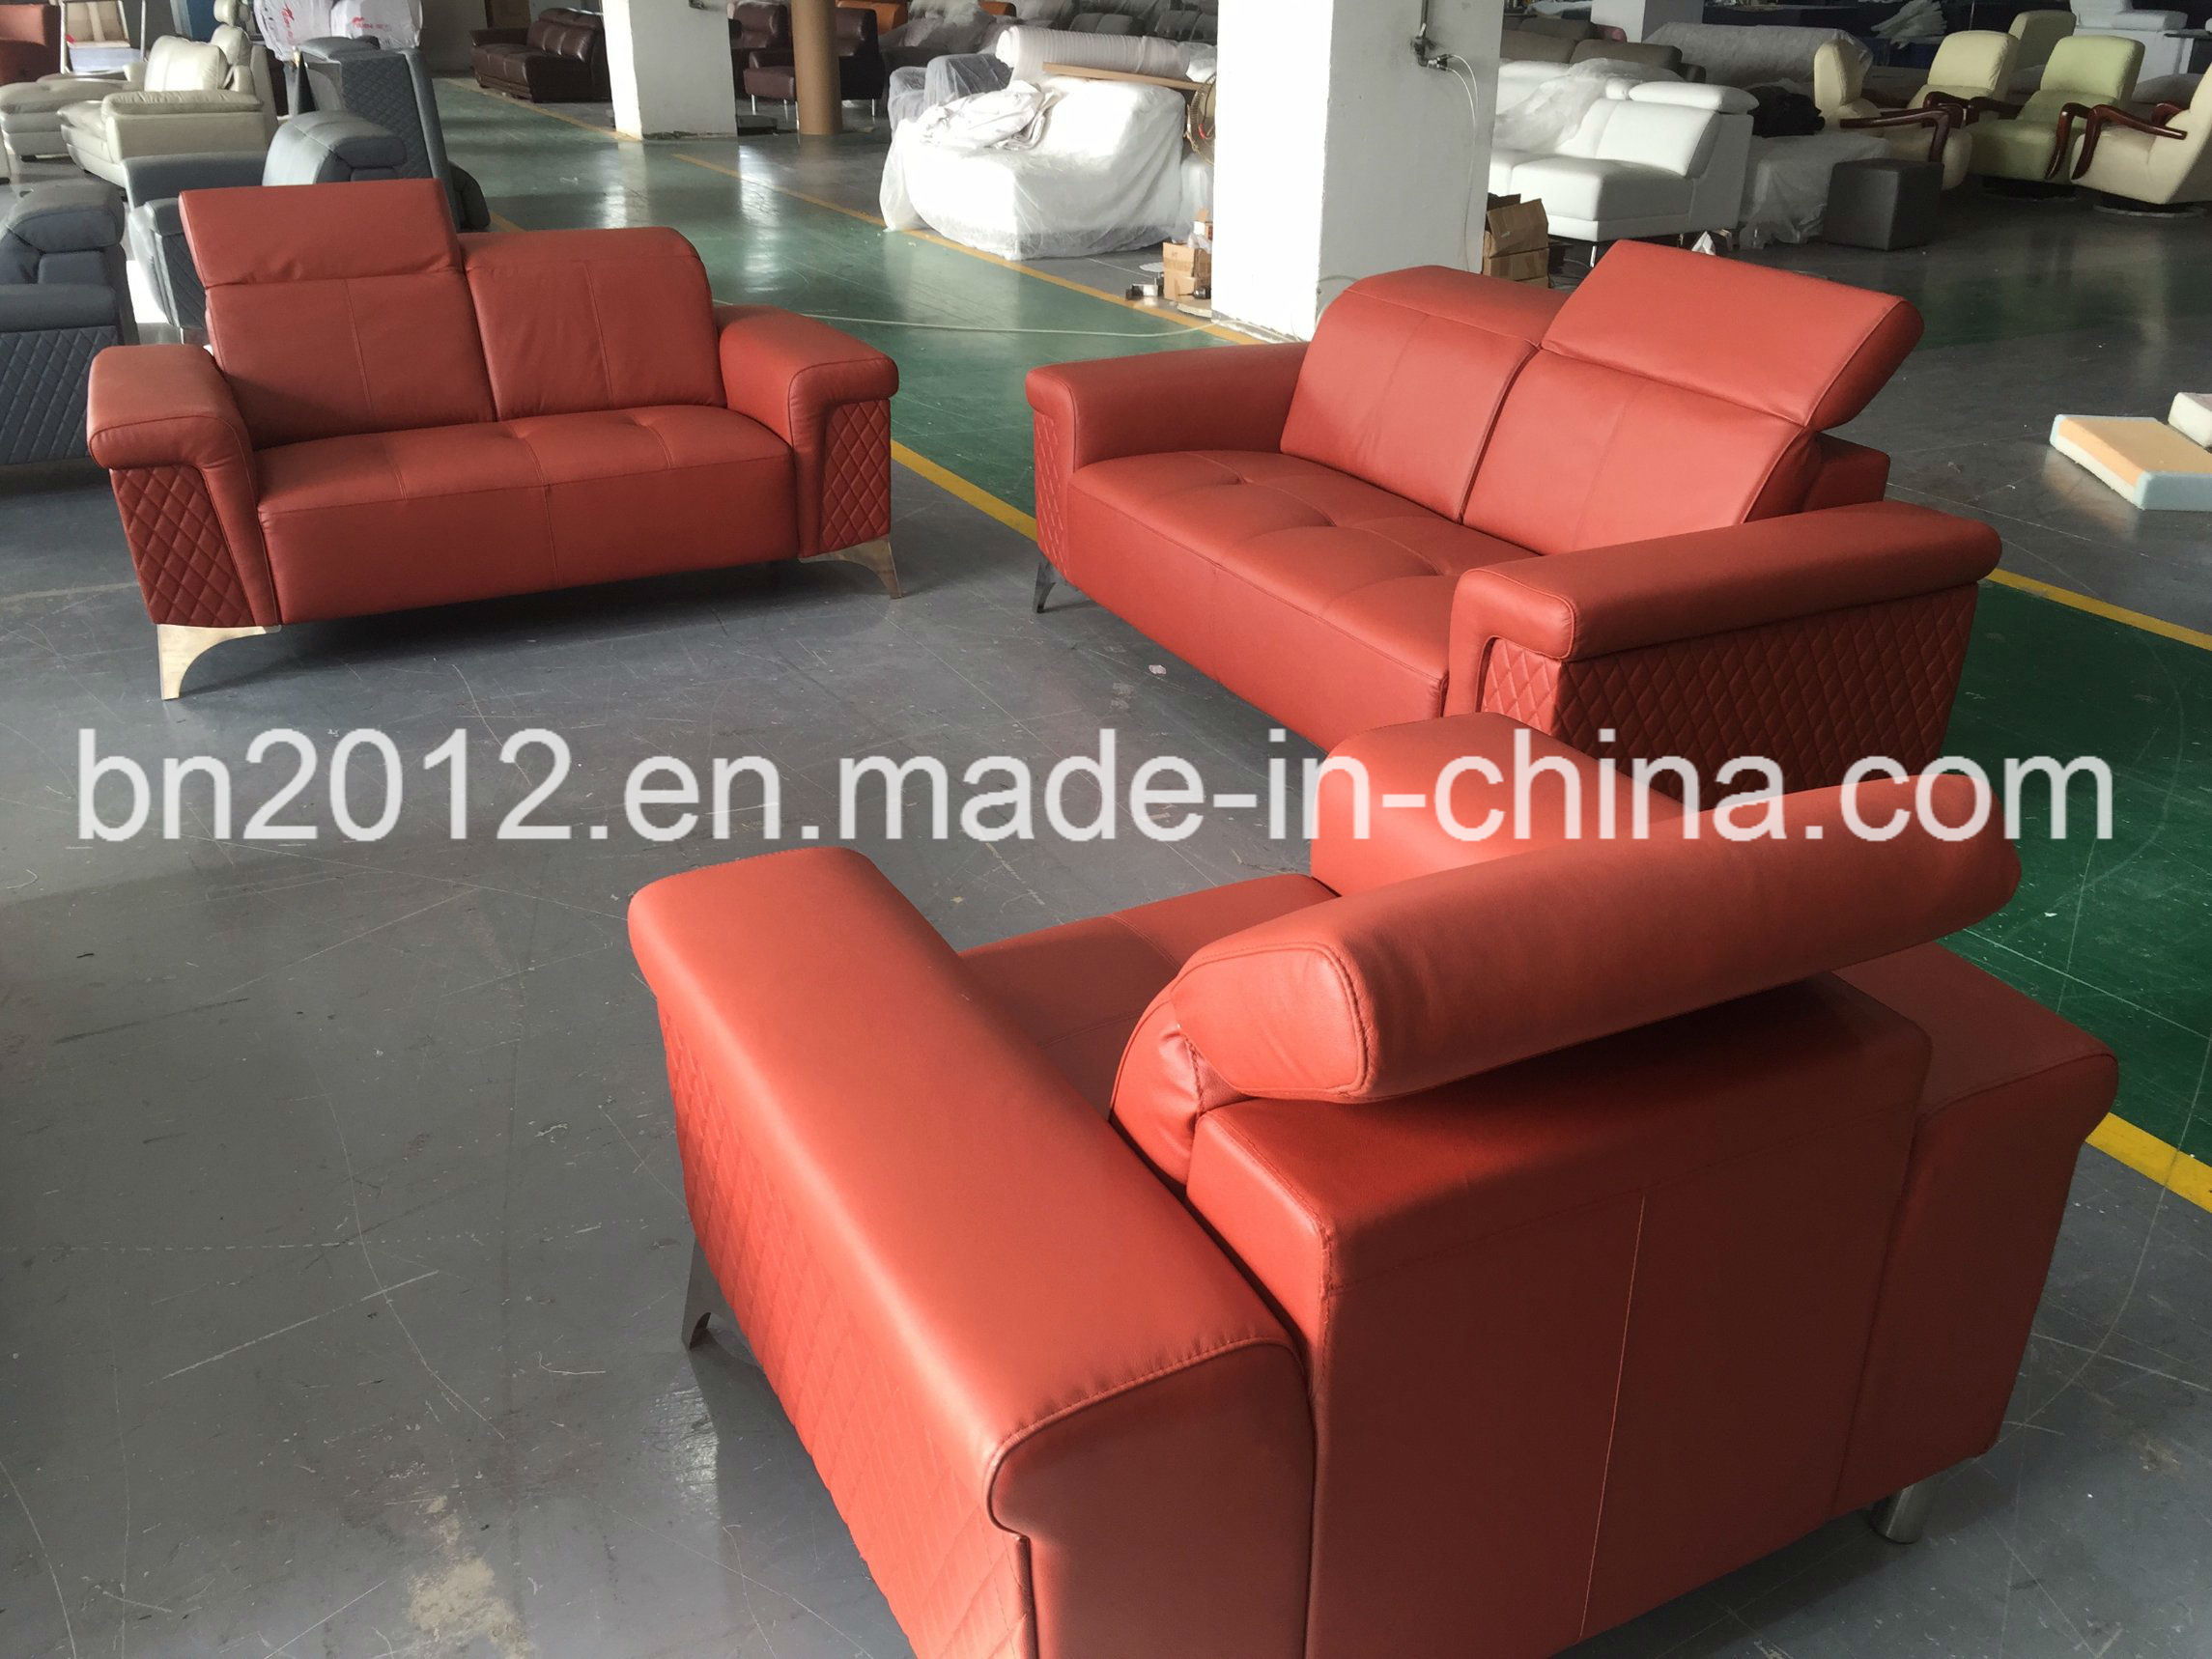 New Design and Hot Selling Leather Sofa Set (SBL-9811)